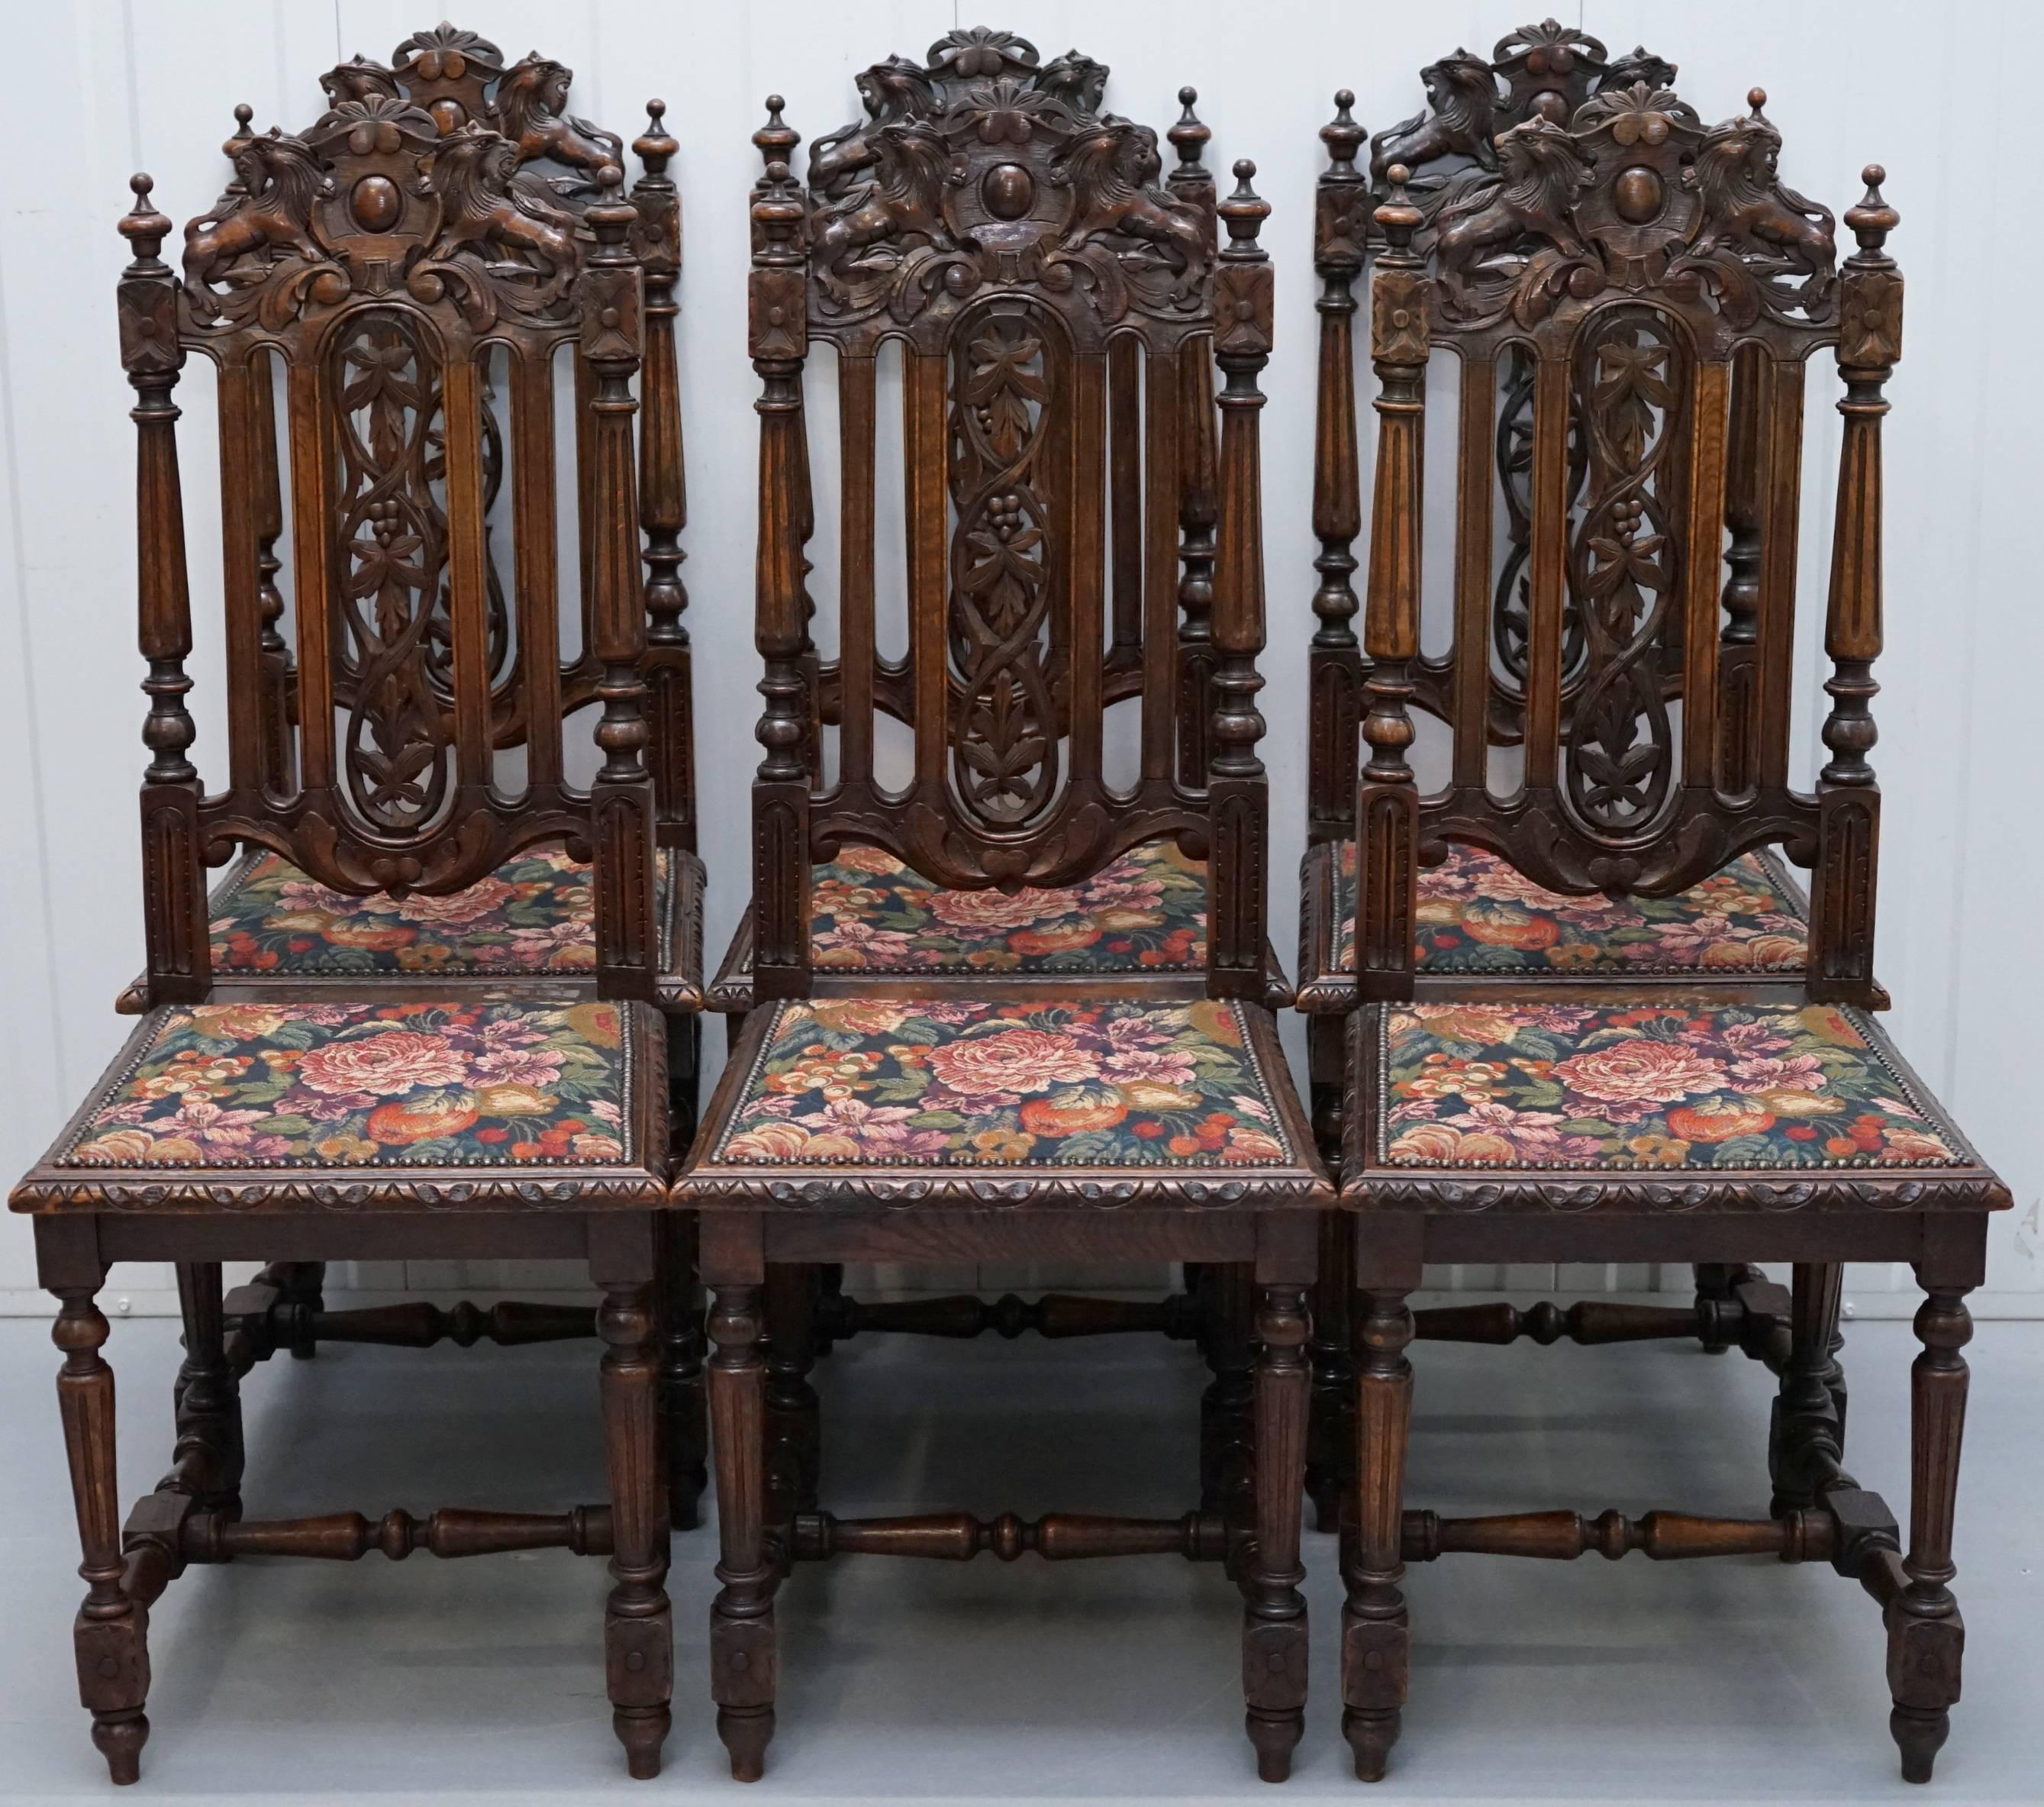 We are delighted to offer for sale this stunning set of eight early Victorian hand-carved oak dining chairs made in the Jacobean manor

A set of eight early Victorian dark oak high back dining chairs of Carolean design, including two armchairs,